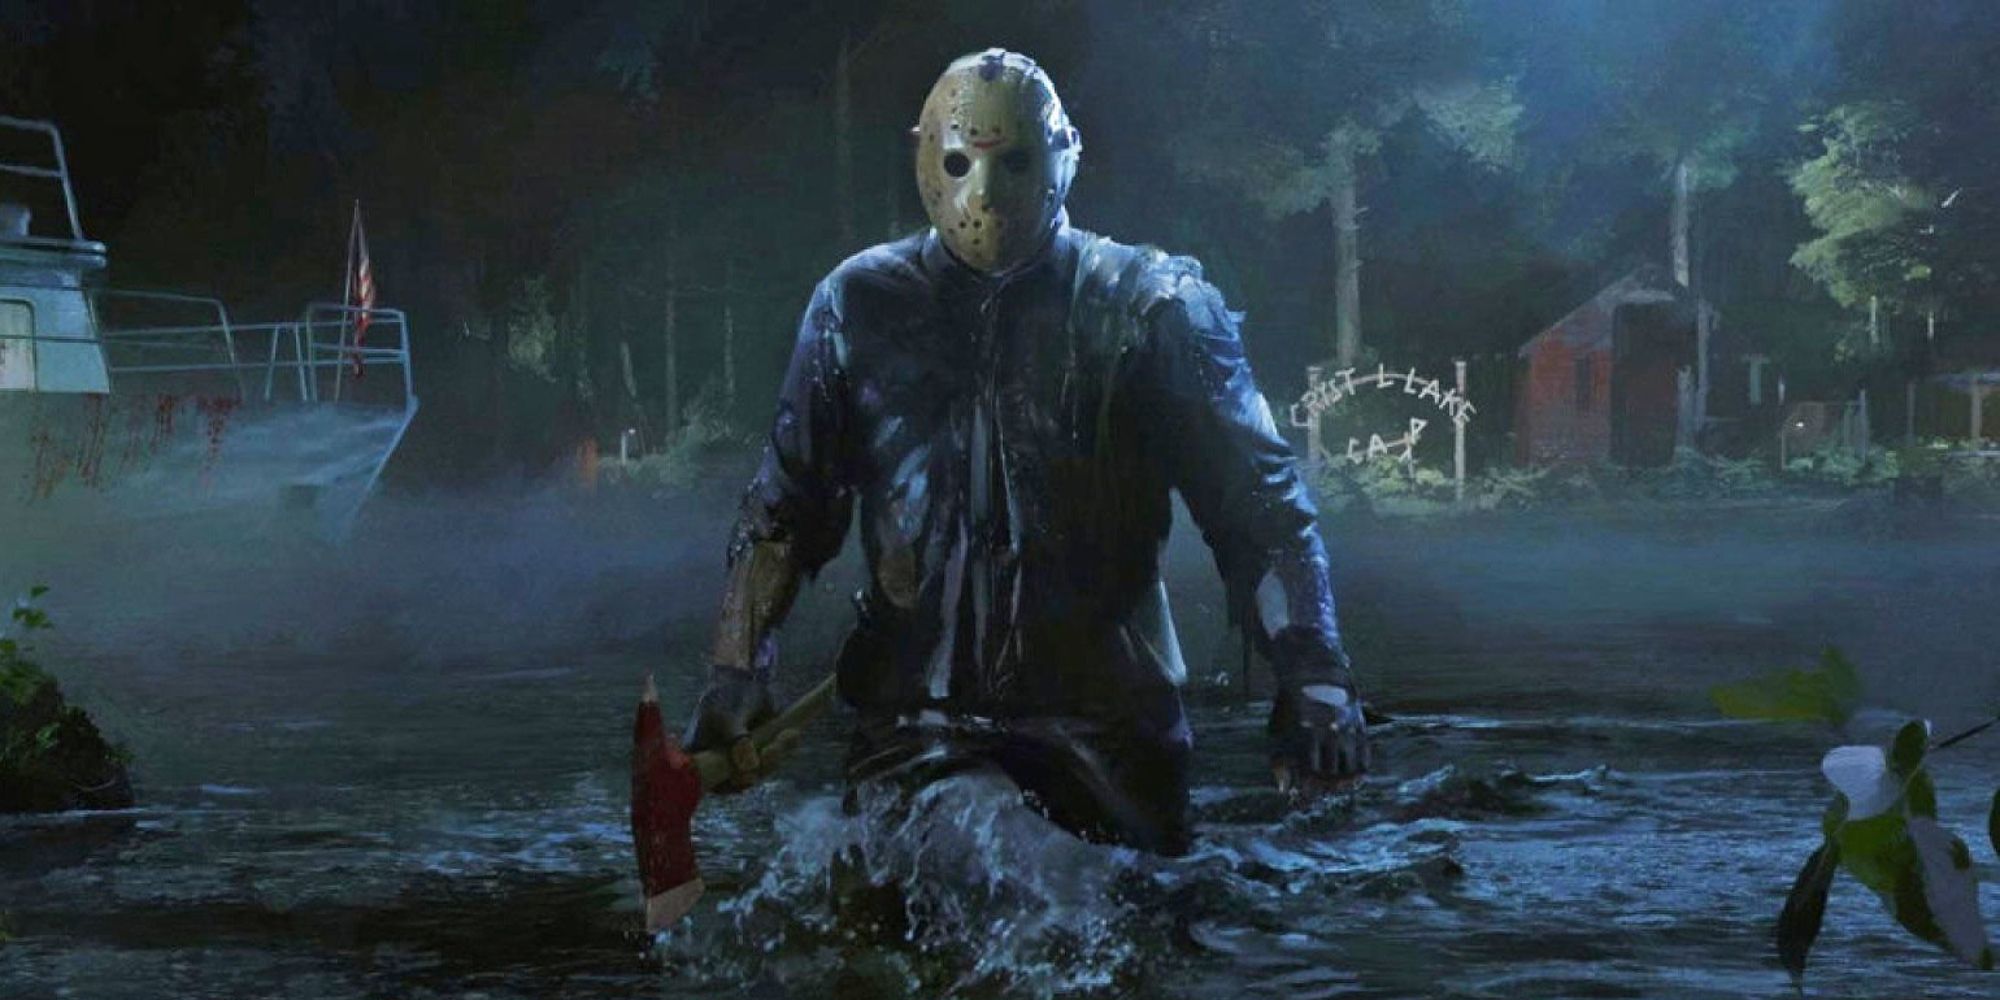 jason voorhees emrging from the river with a weapon in hand